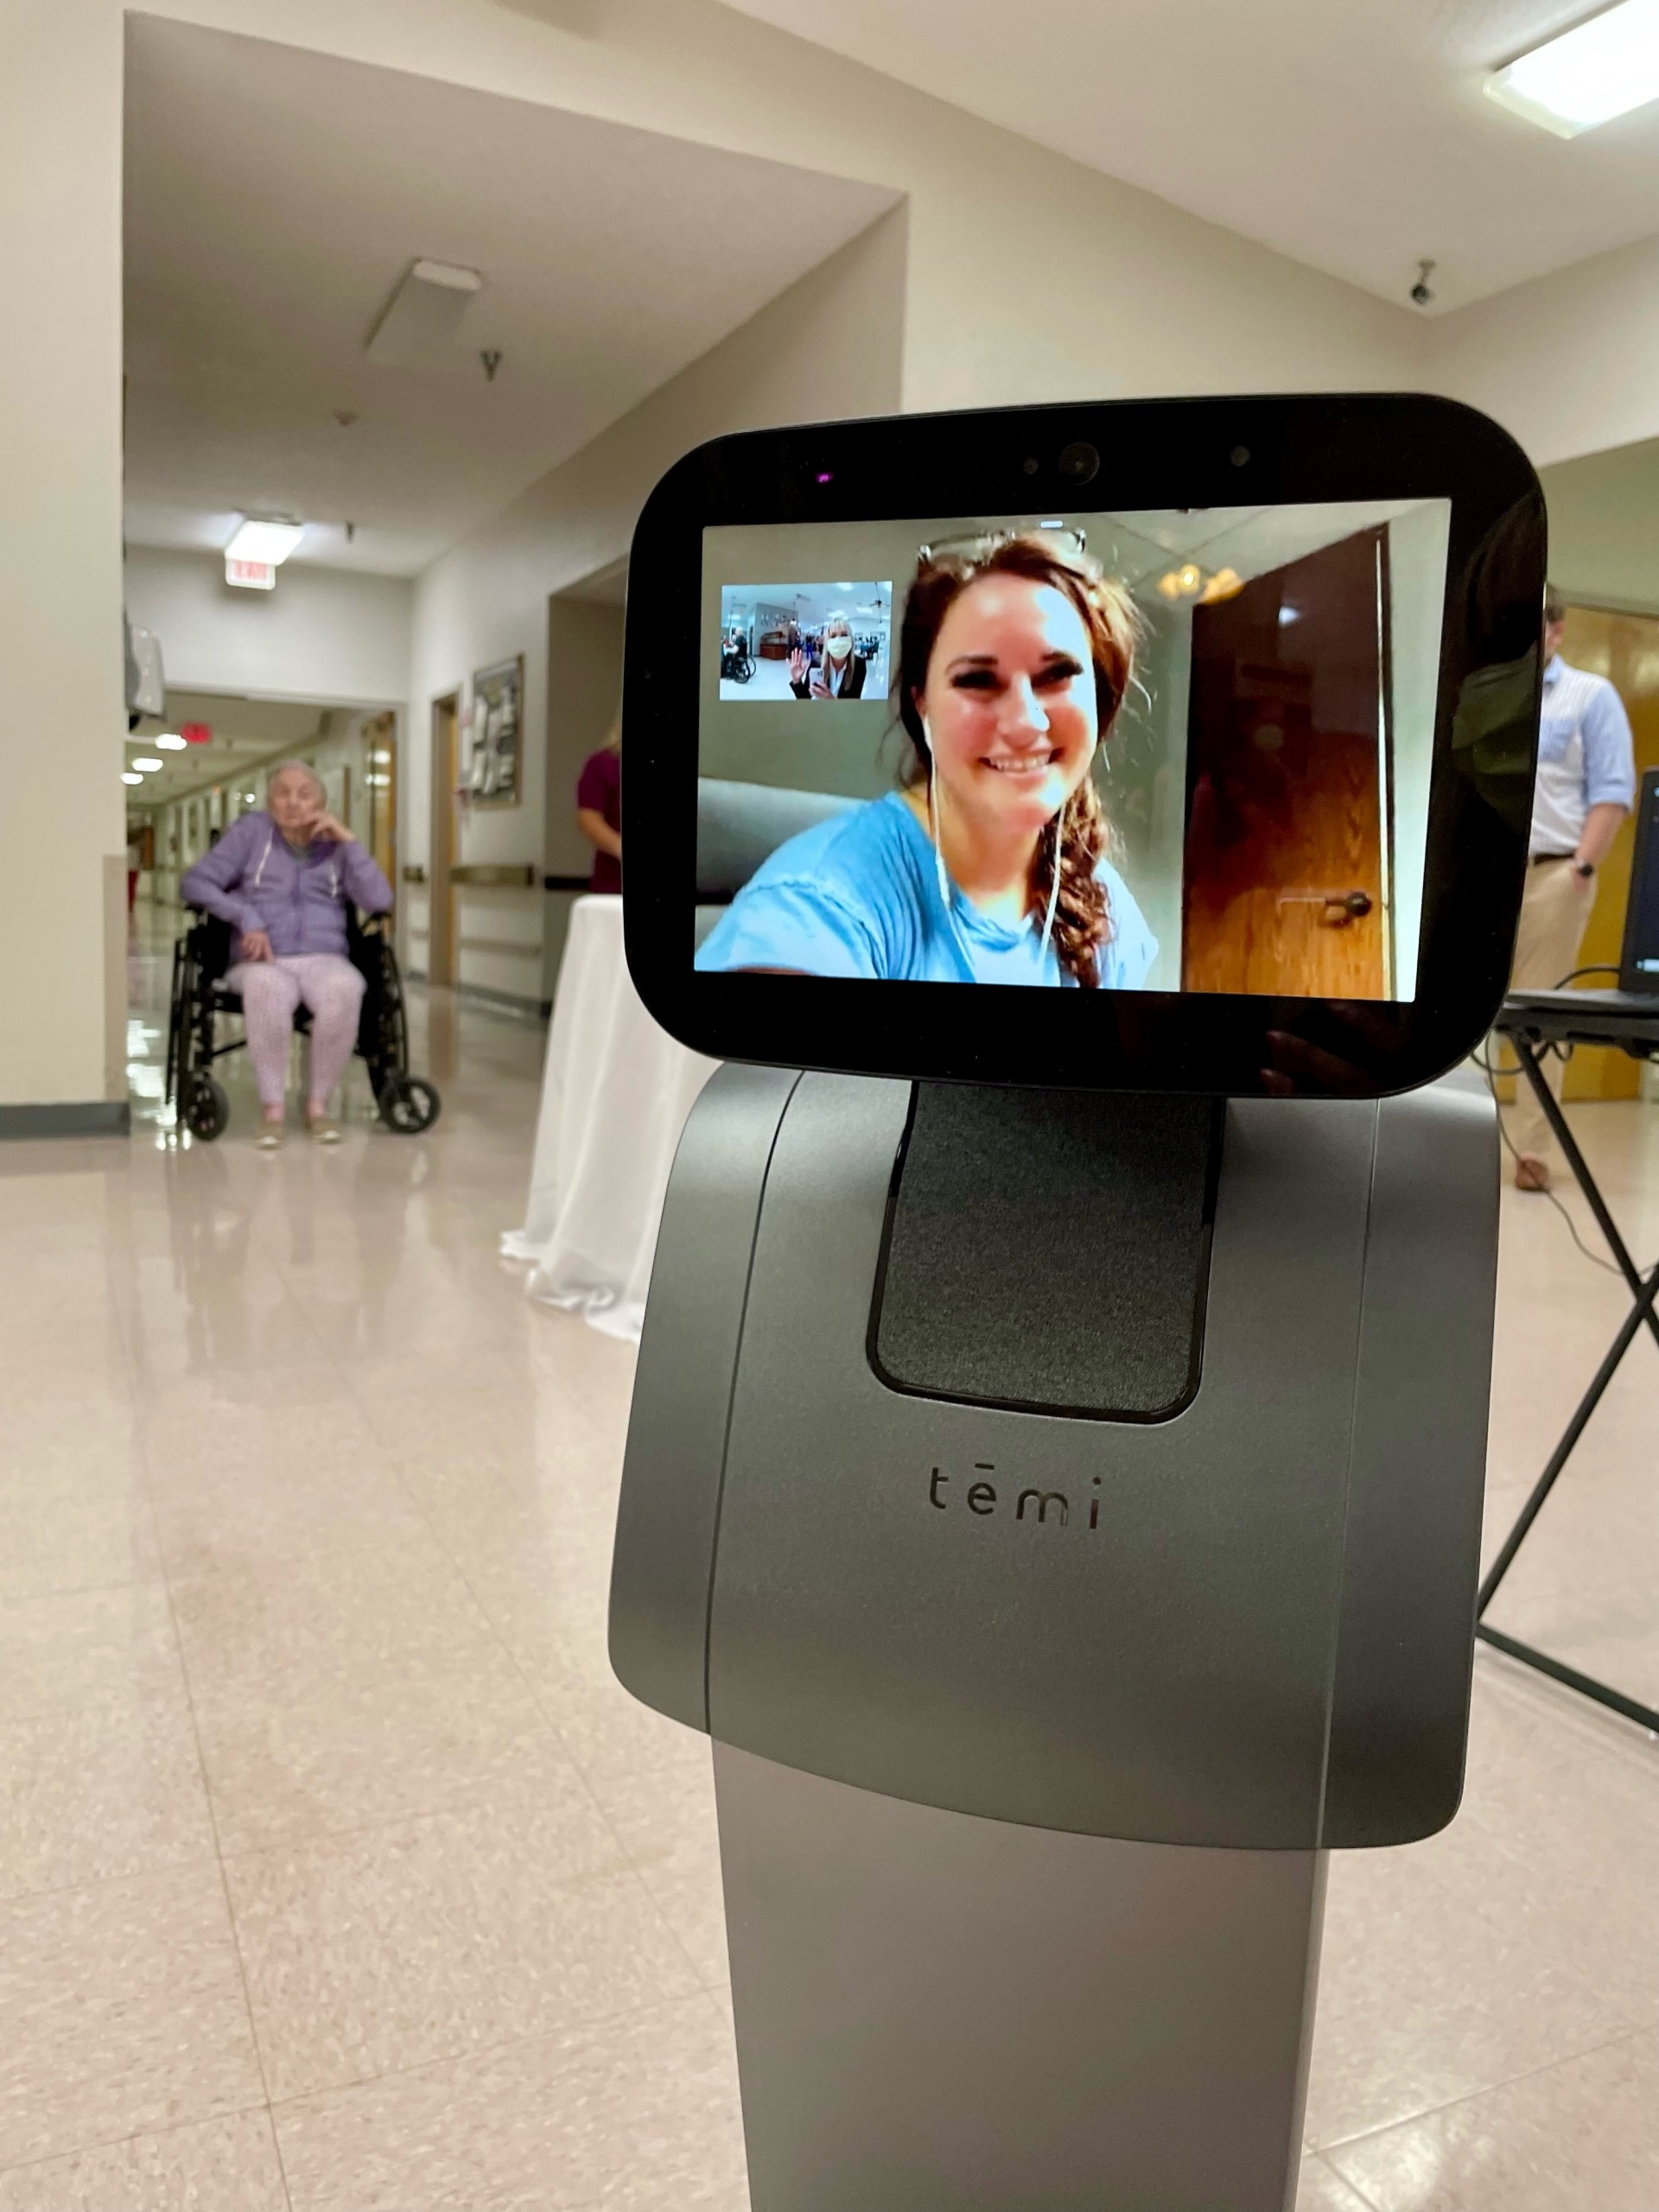 Robot with a smiling woman on the display screen